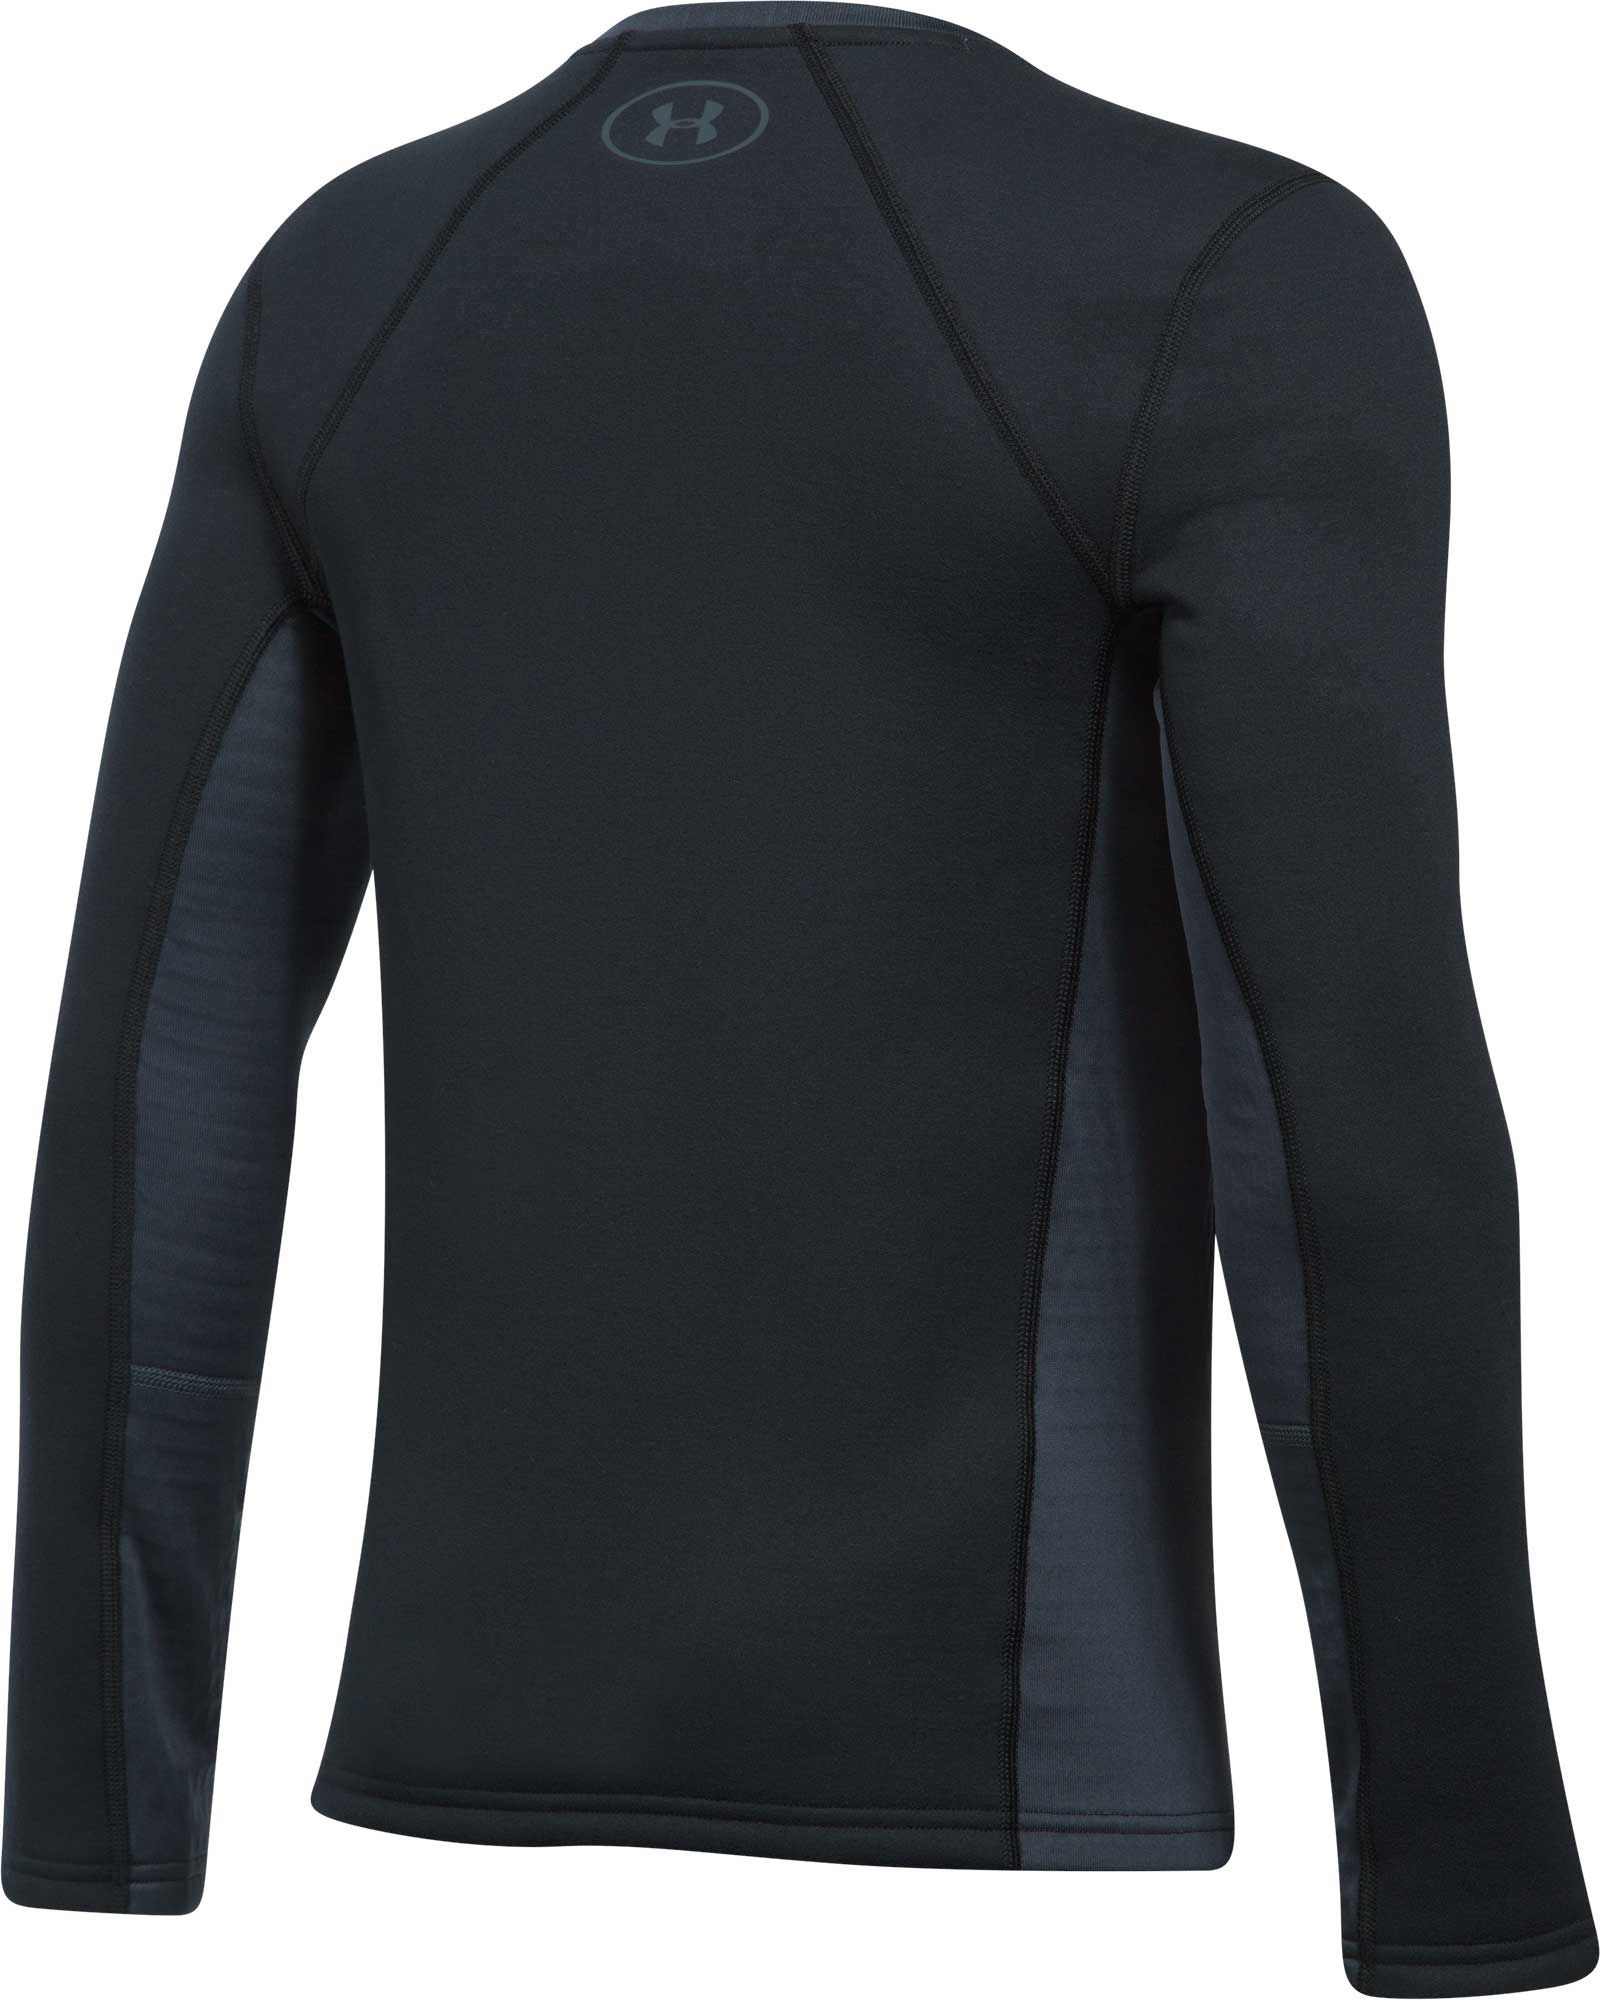 under armour base layer shirt